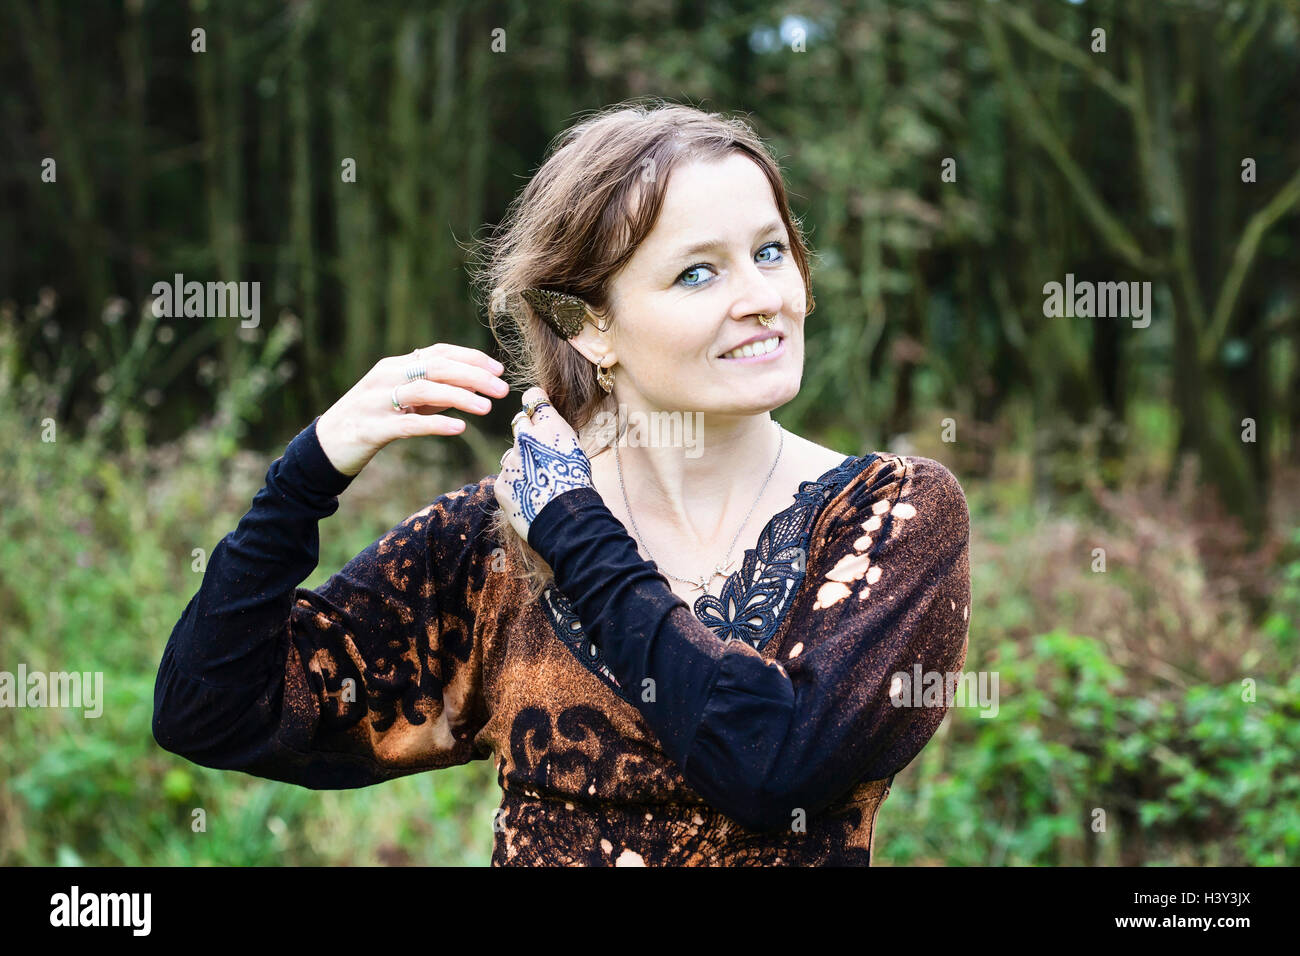 Elven woman in forest Stock Photo